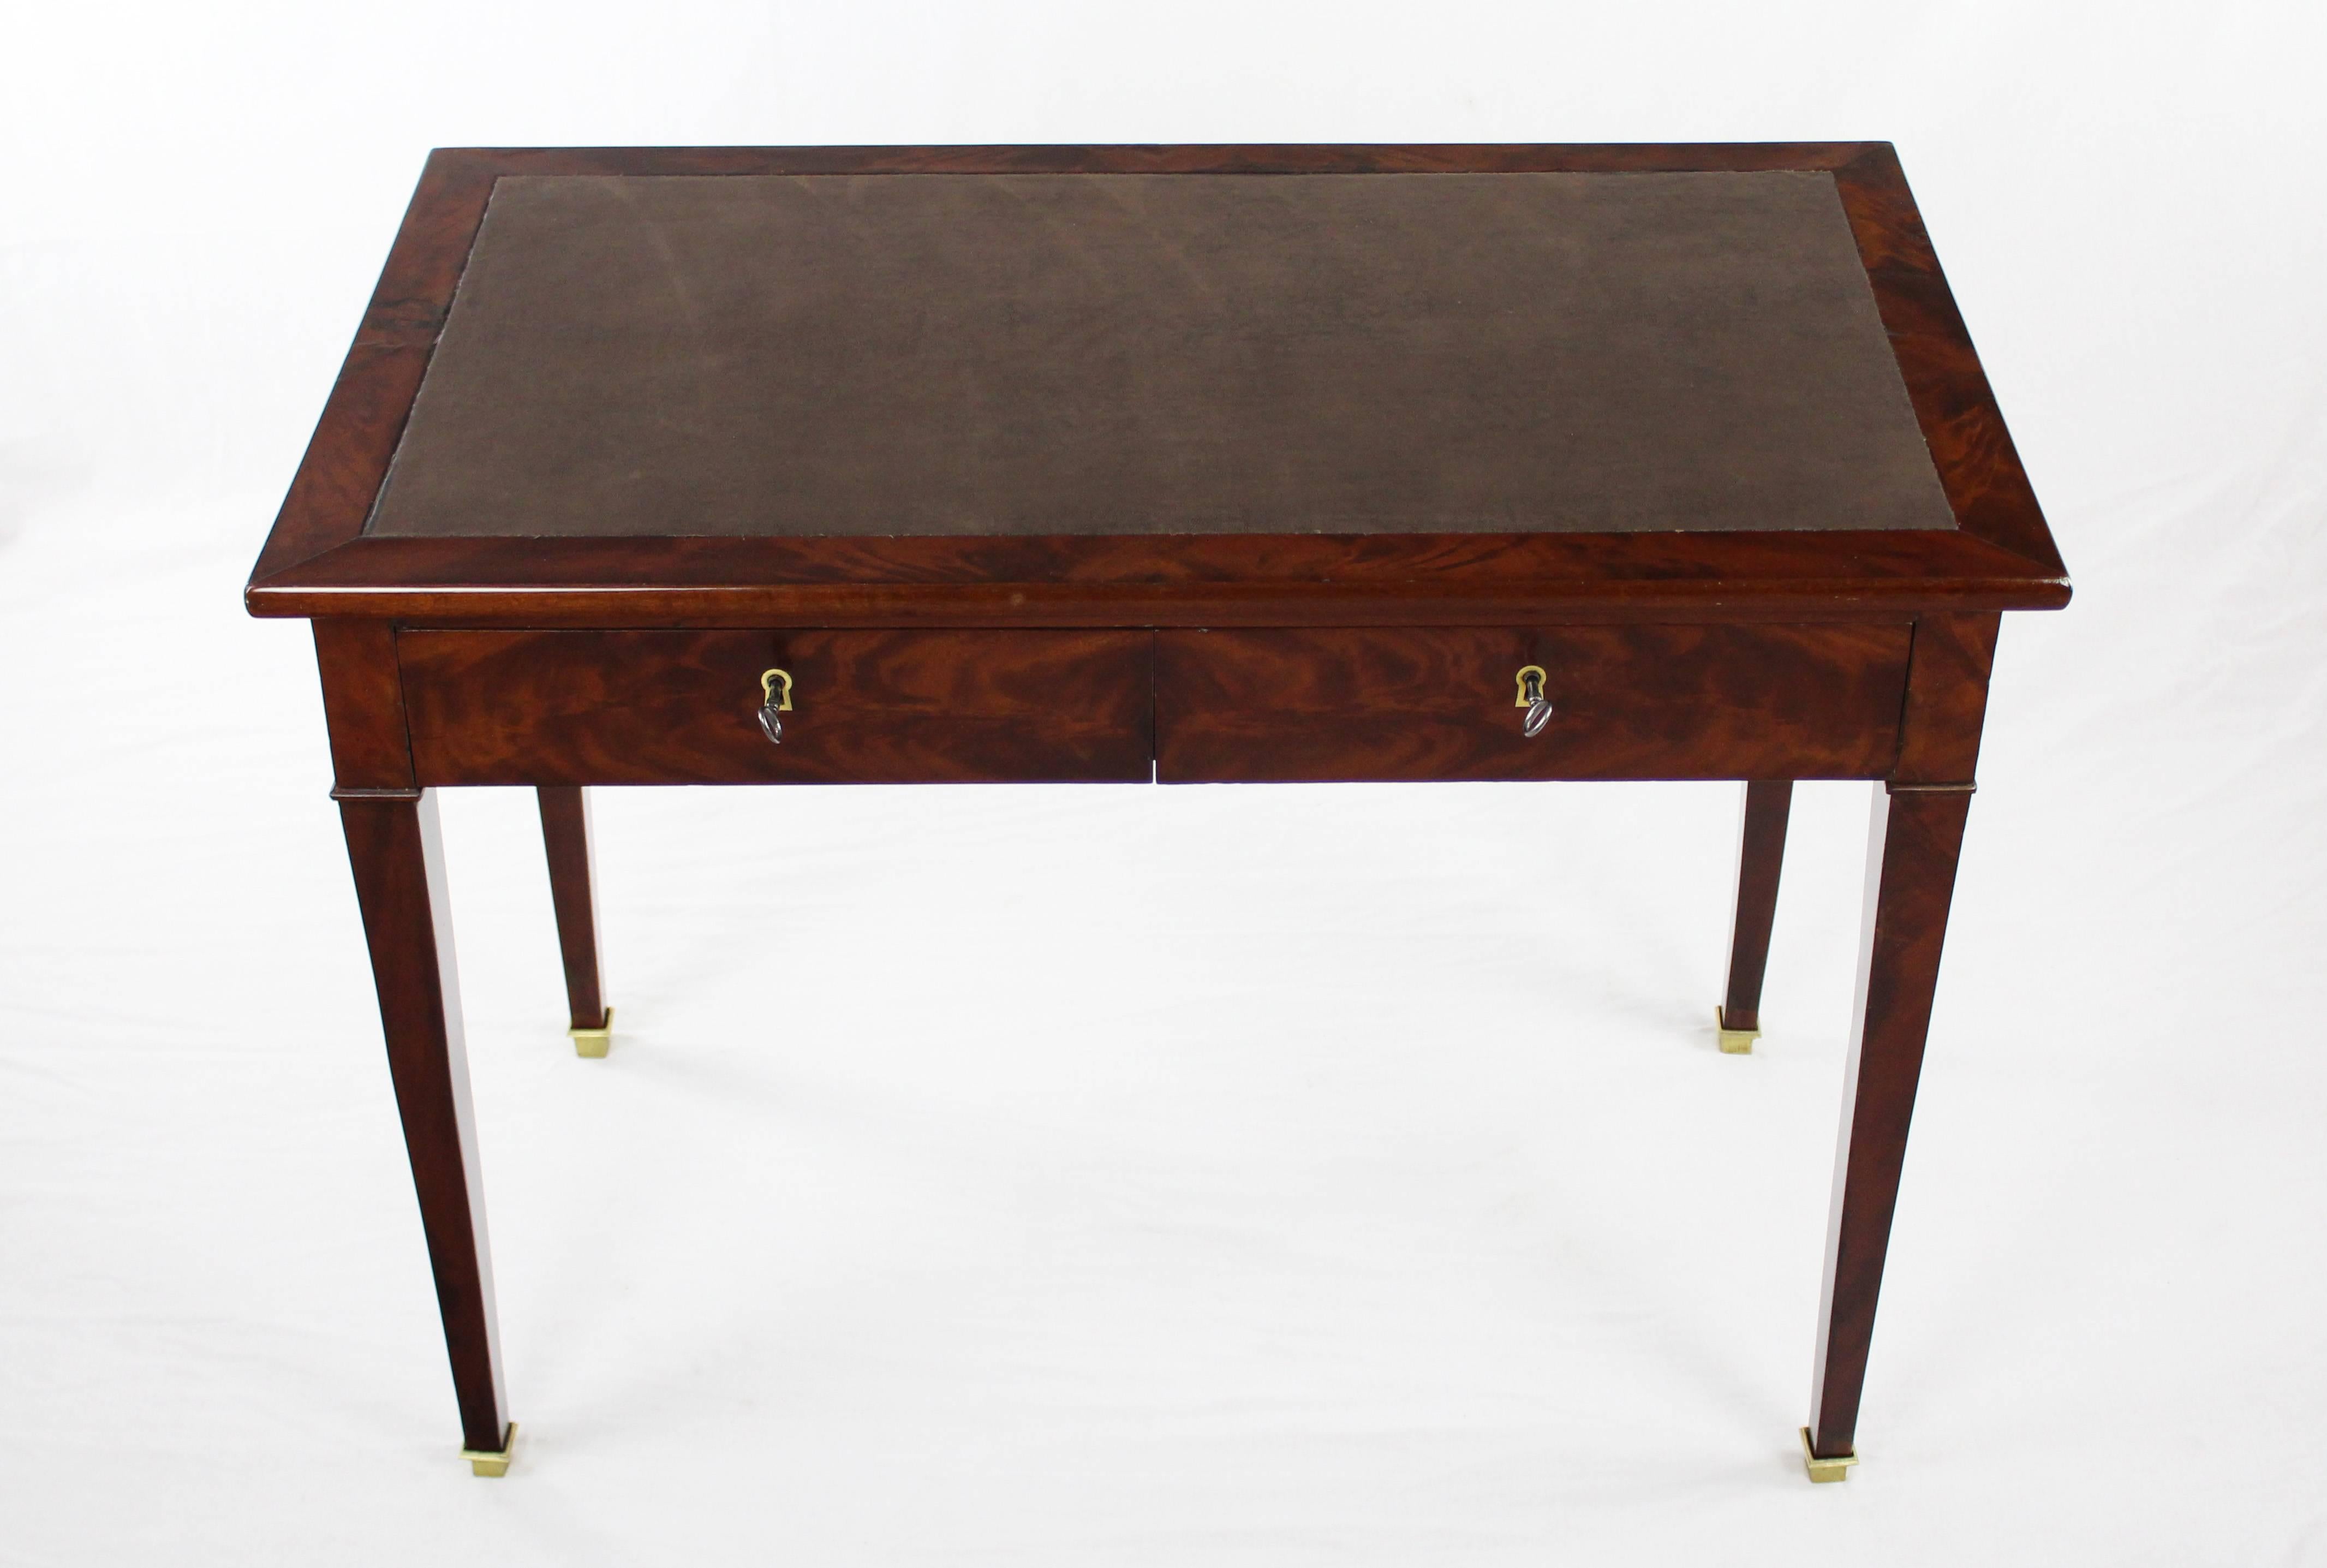 An elegant and graceful straight-lined desk from the late Biedermeier period, worked circa 1840-1850 in mahogany veneered on oak. The table has a leather inlay on the slightly overhanging top, as well as two separately lockable drawers under the